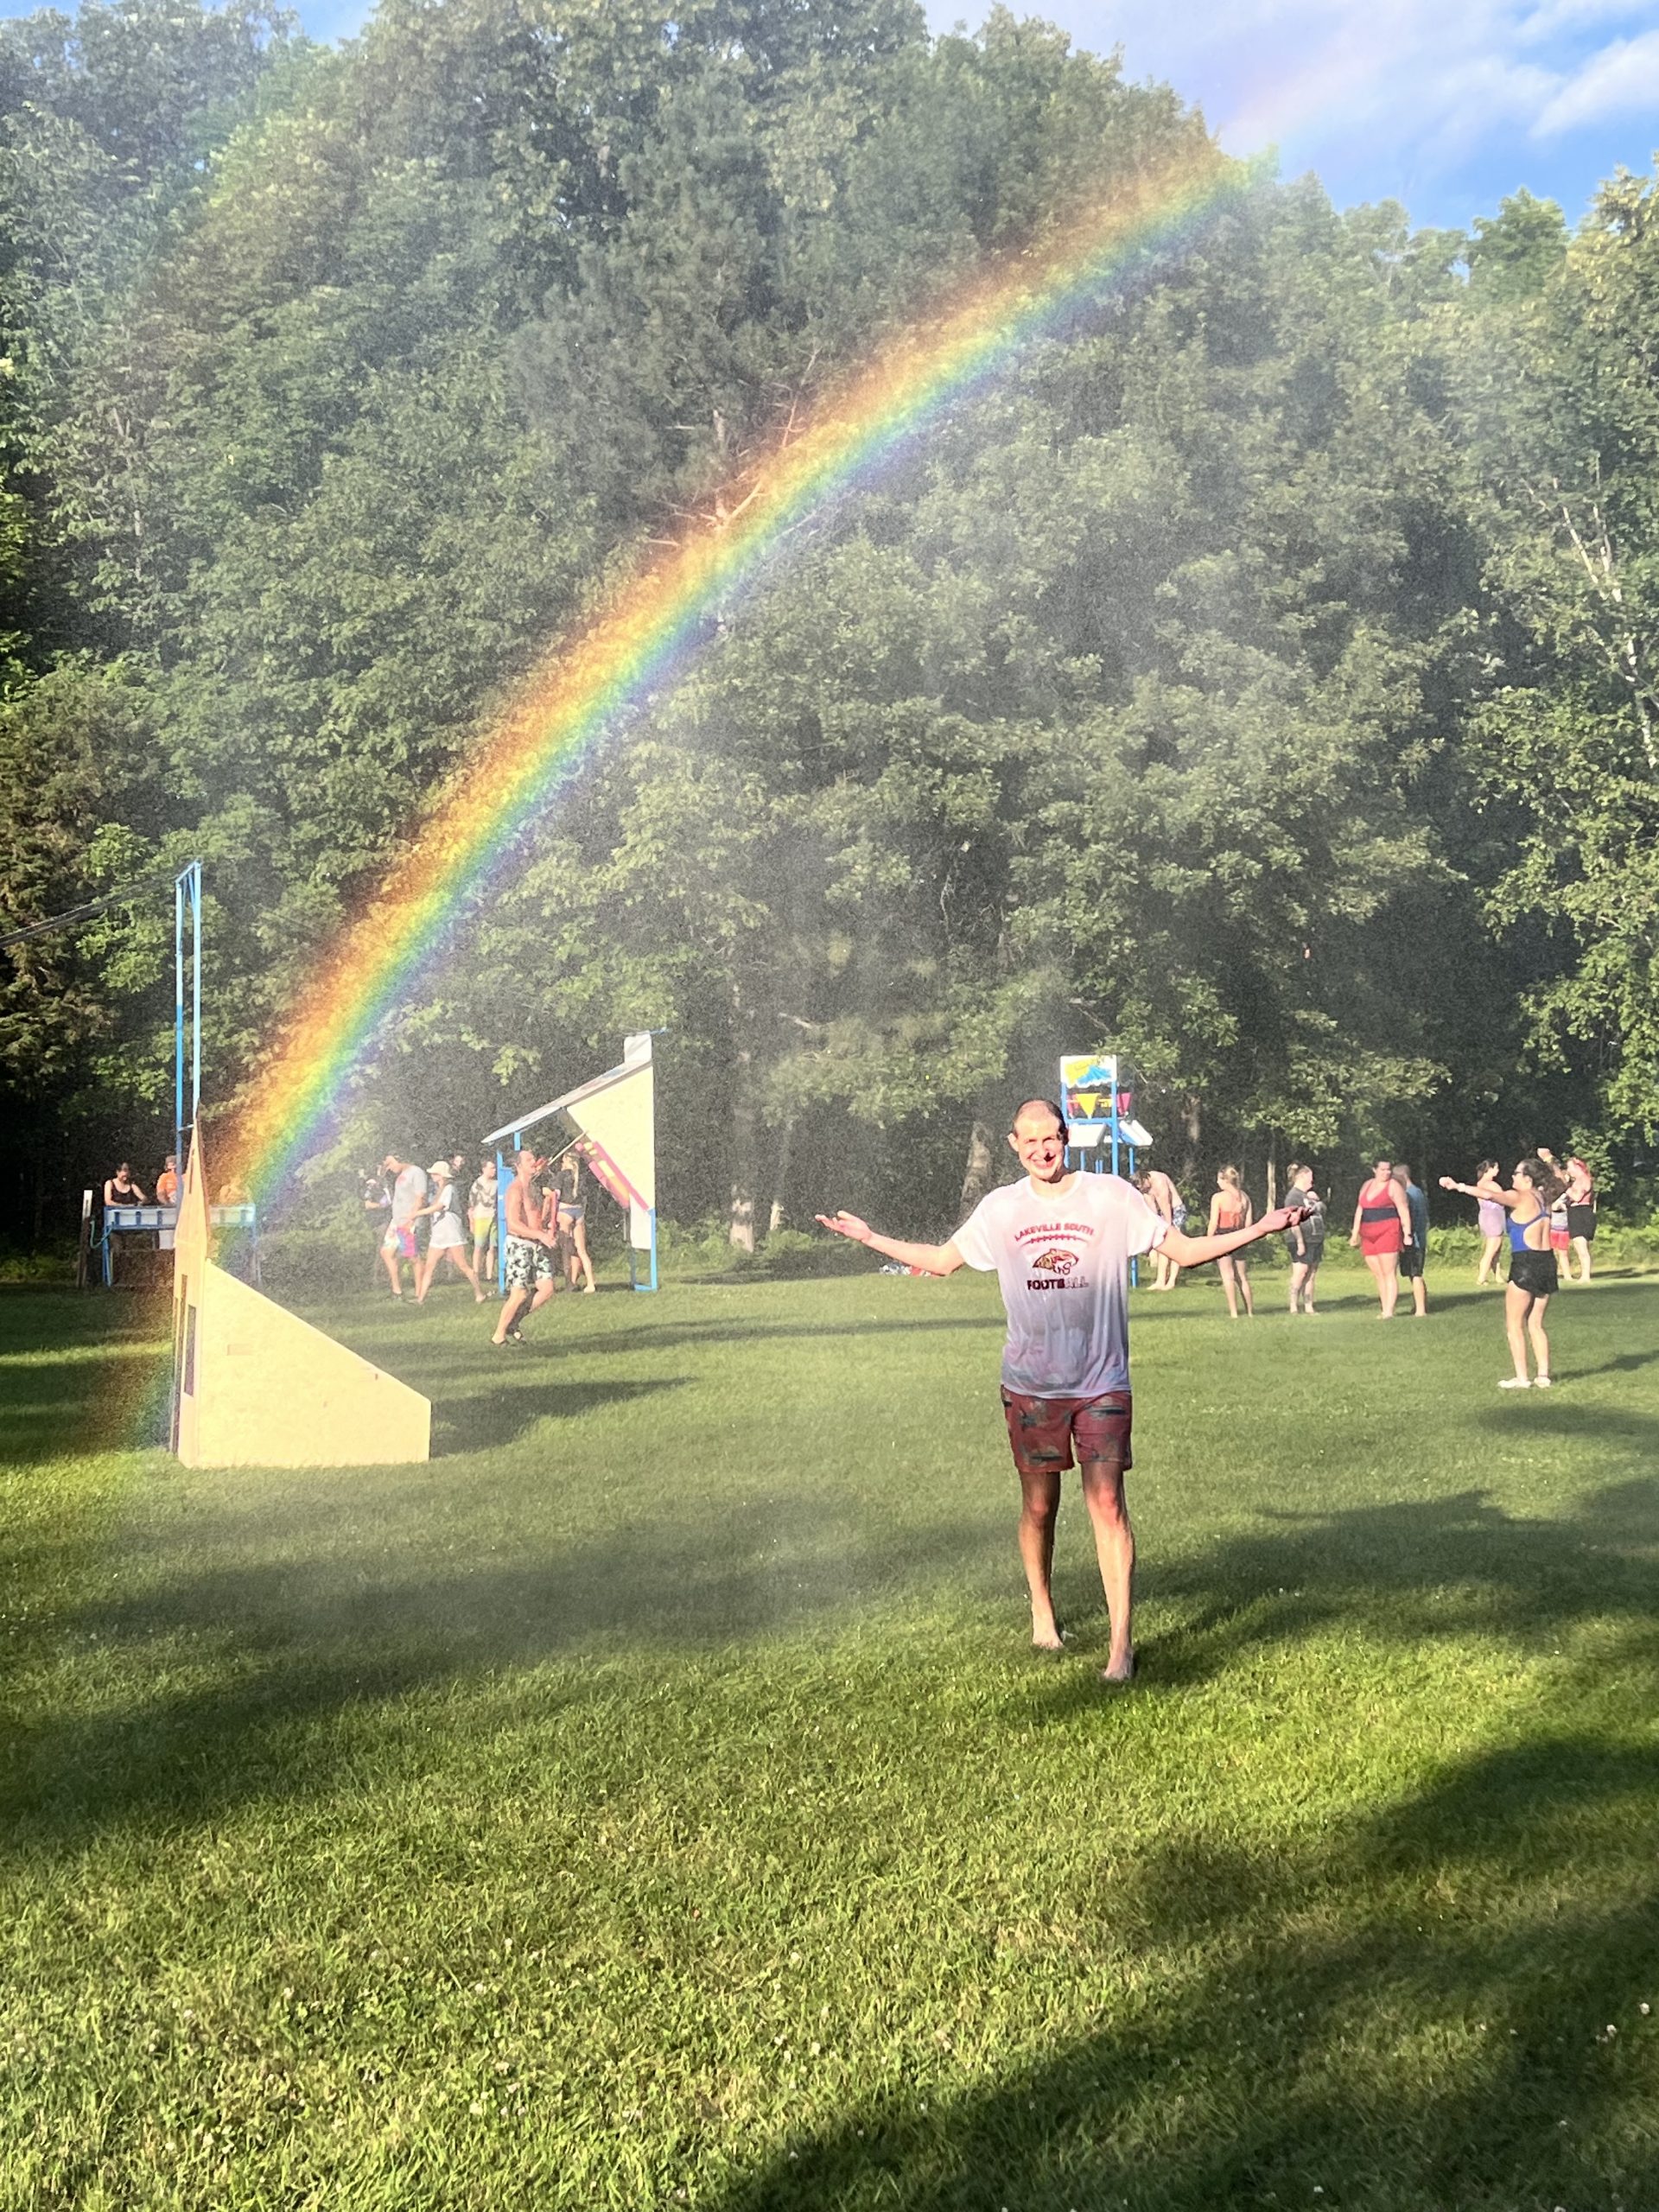 A camper, a young man, stands in a field underneath a spray of water, soaking it up. There's a beautiful rainbow over his head.